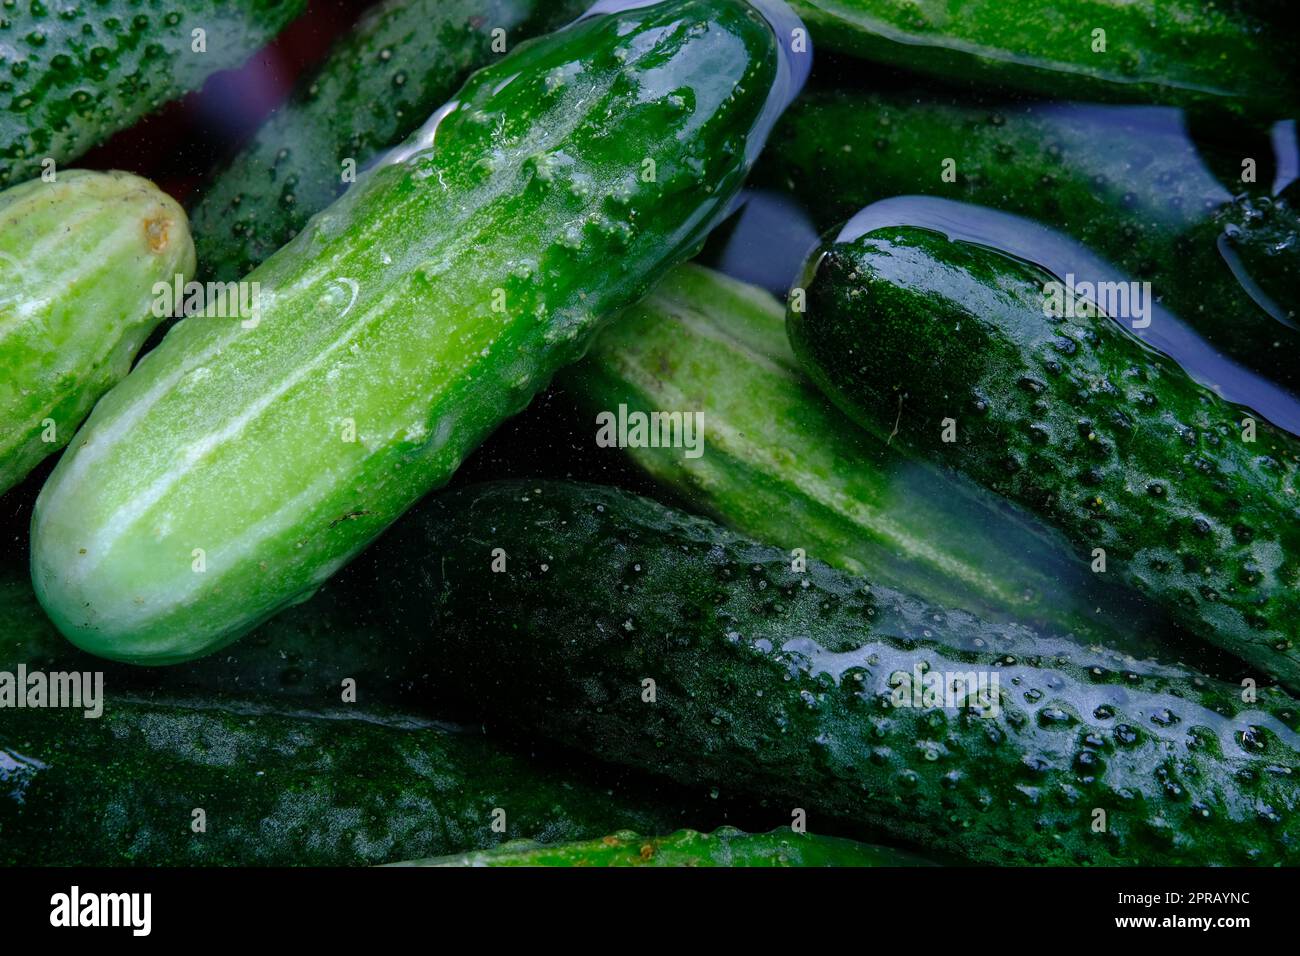 Soaking cucumbers in ice cold water for 4 to 5 hours before pickling gives nice crisp pickles. Home food hack. Stock Photo